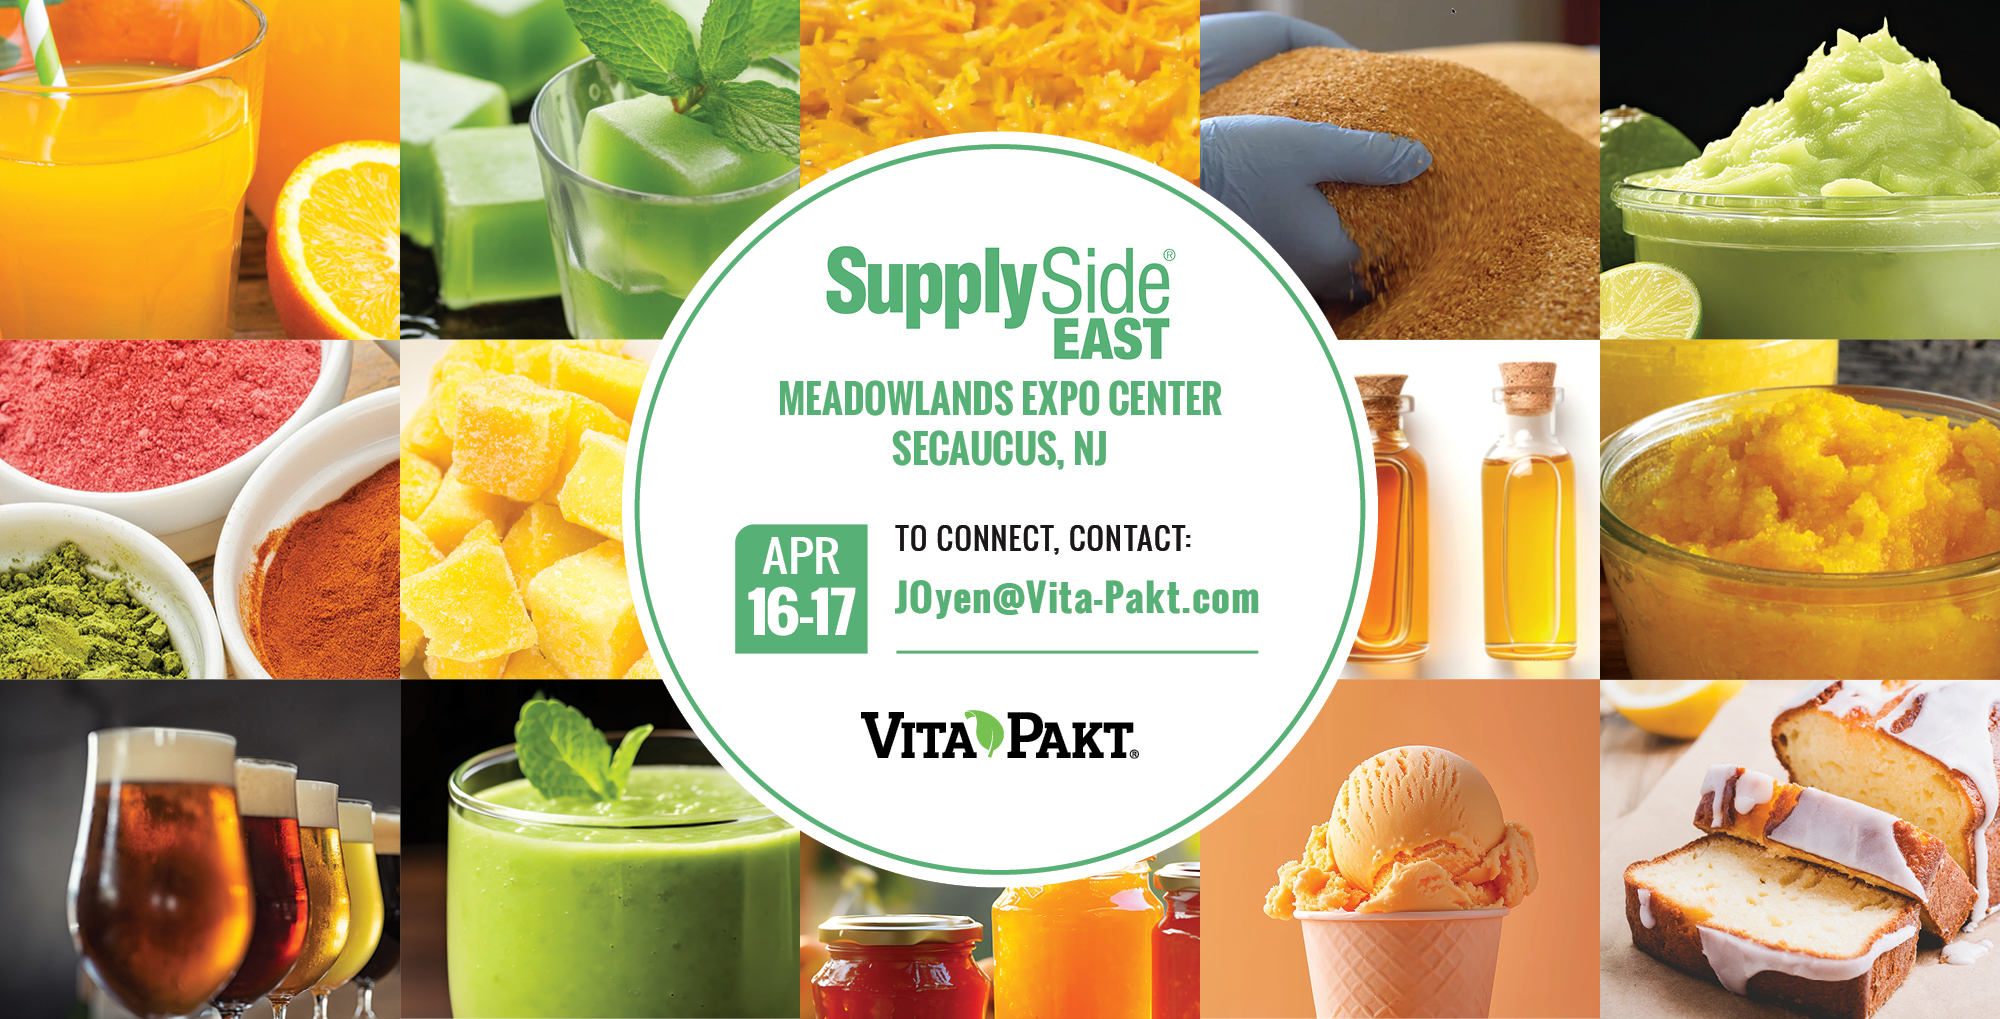 AC9477 VP - Trade Show Web Banner - Supply Side East